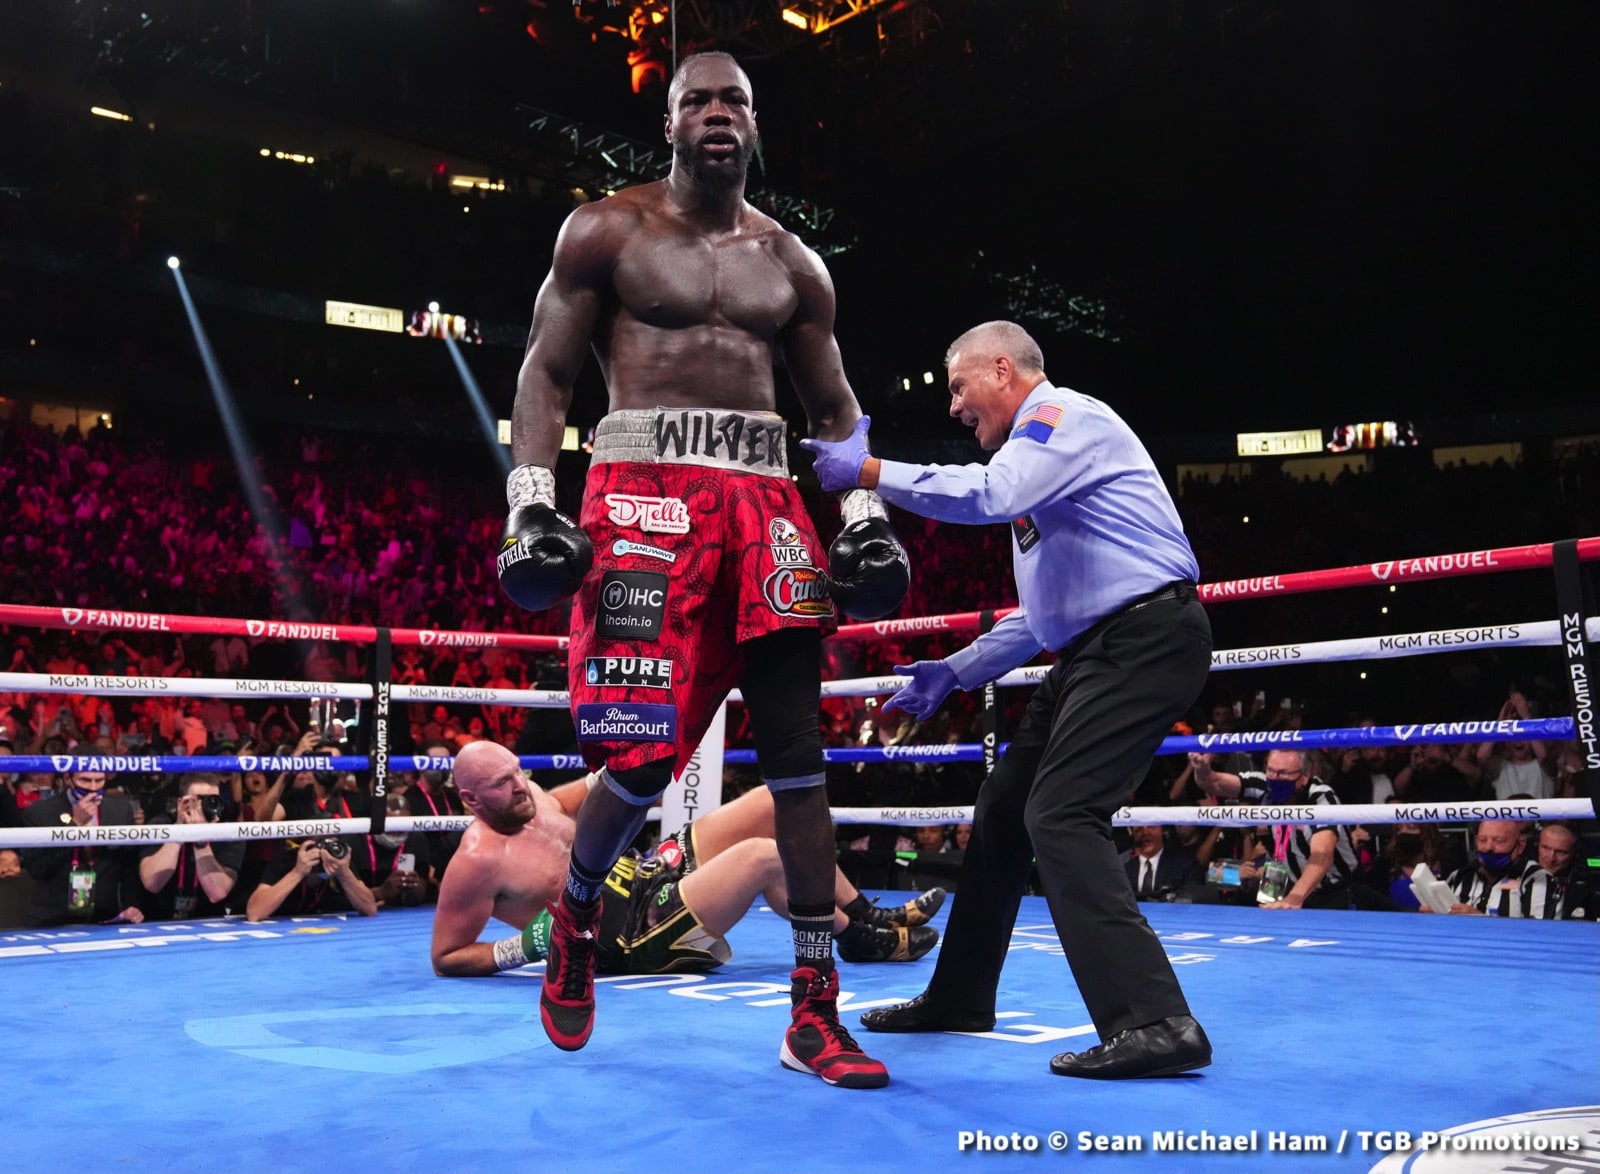 Deontay Wilder clocks in fastest knockouts per fight ahead of potential title bout, Fury follows in close second - Boxing Image